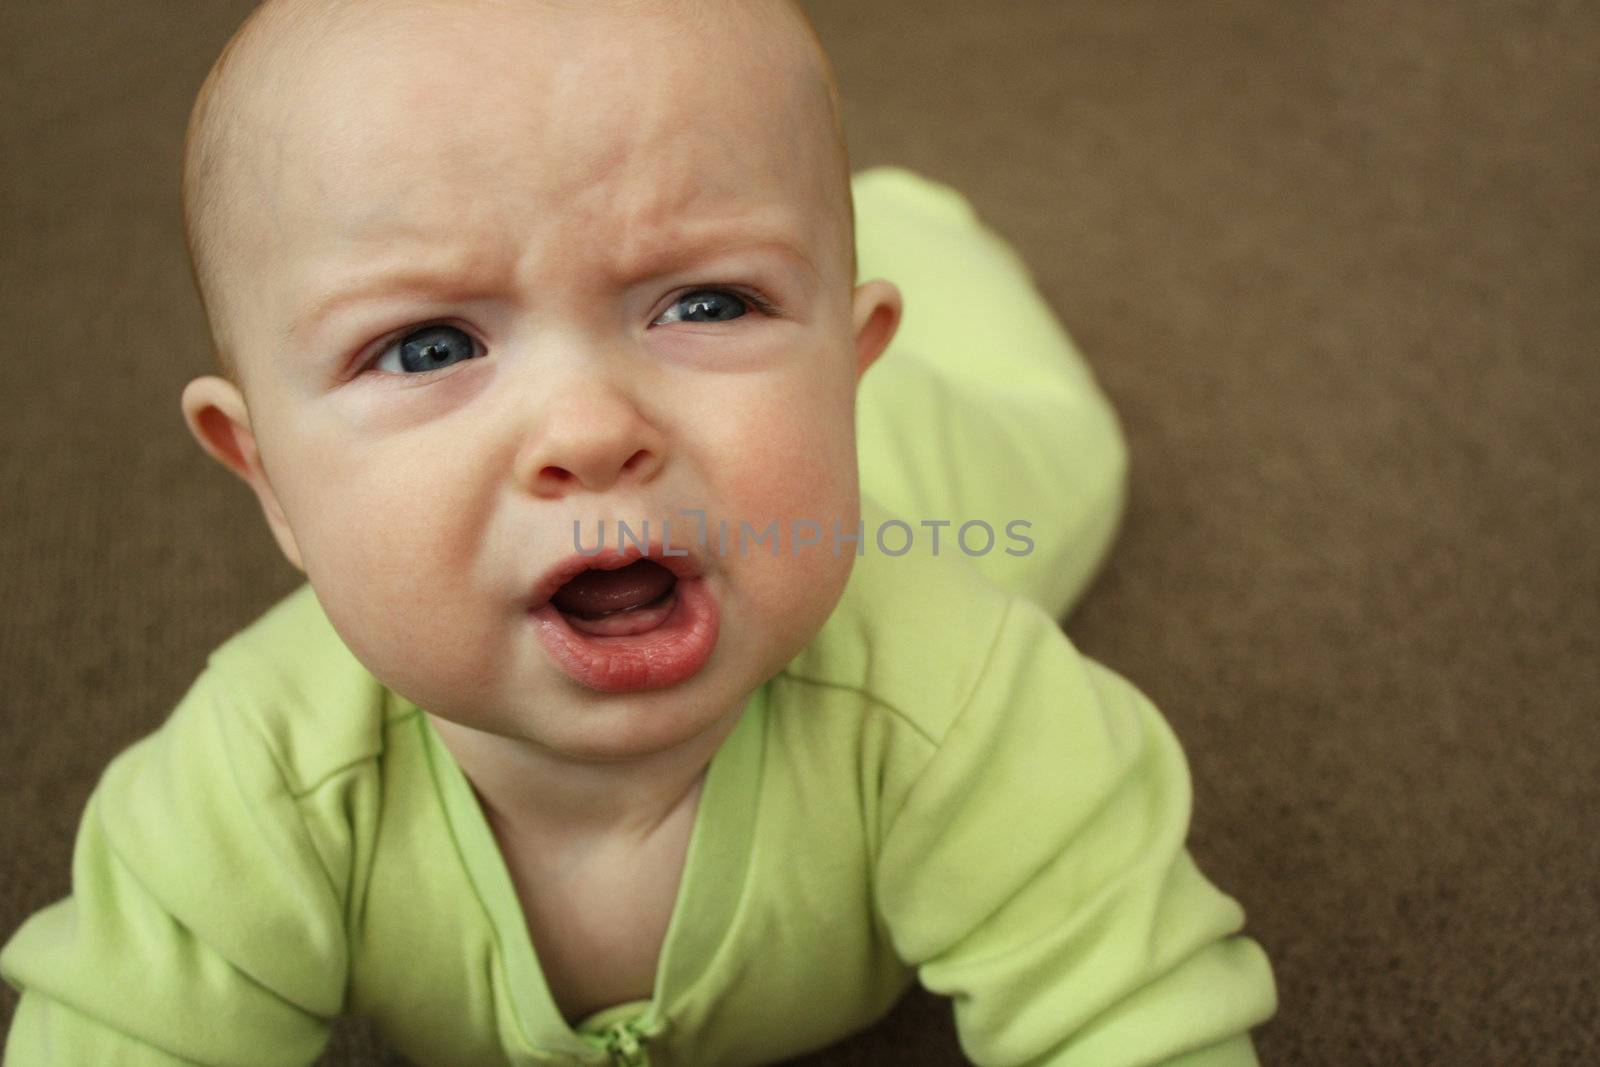 A close-up of a baby in a light green outfit on a brown carpet, crying.